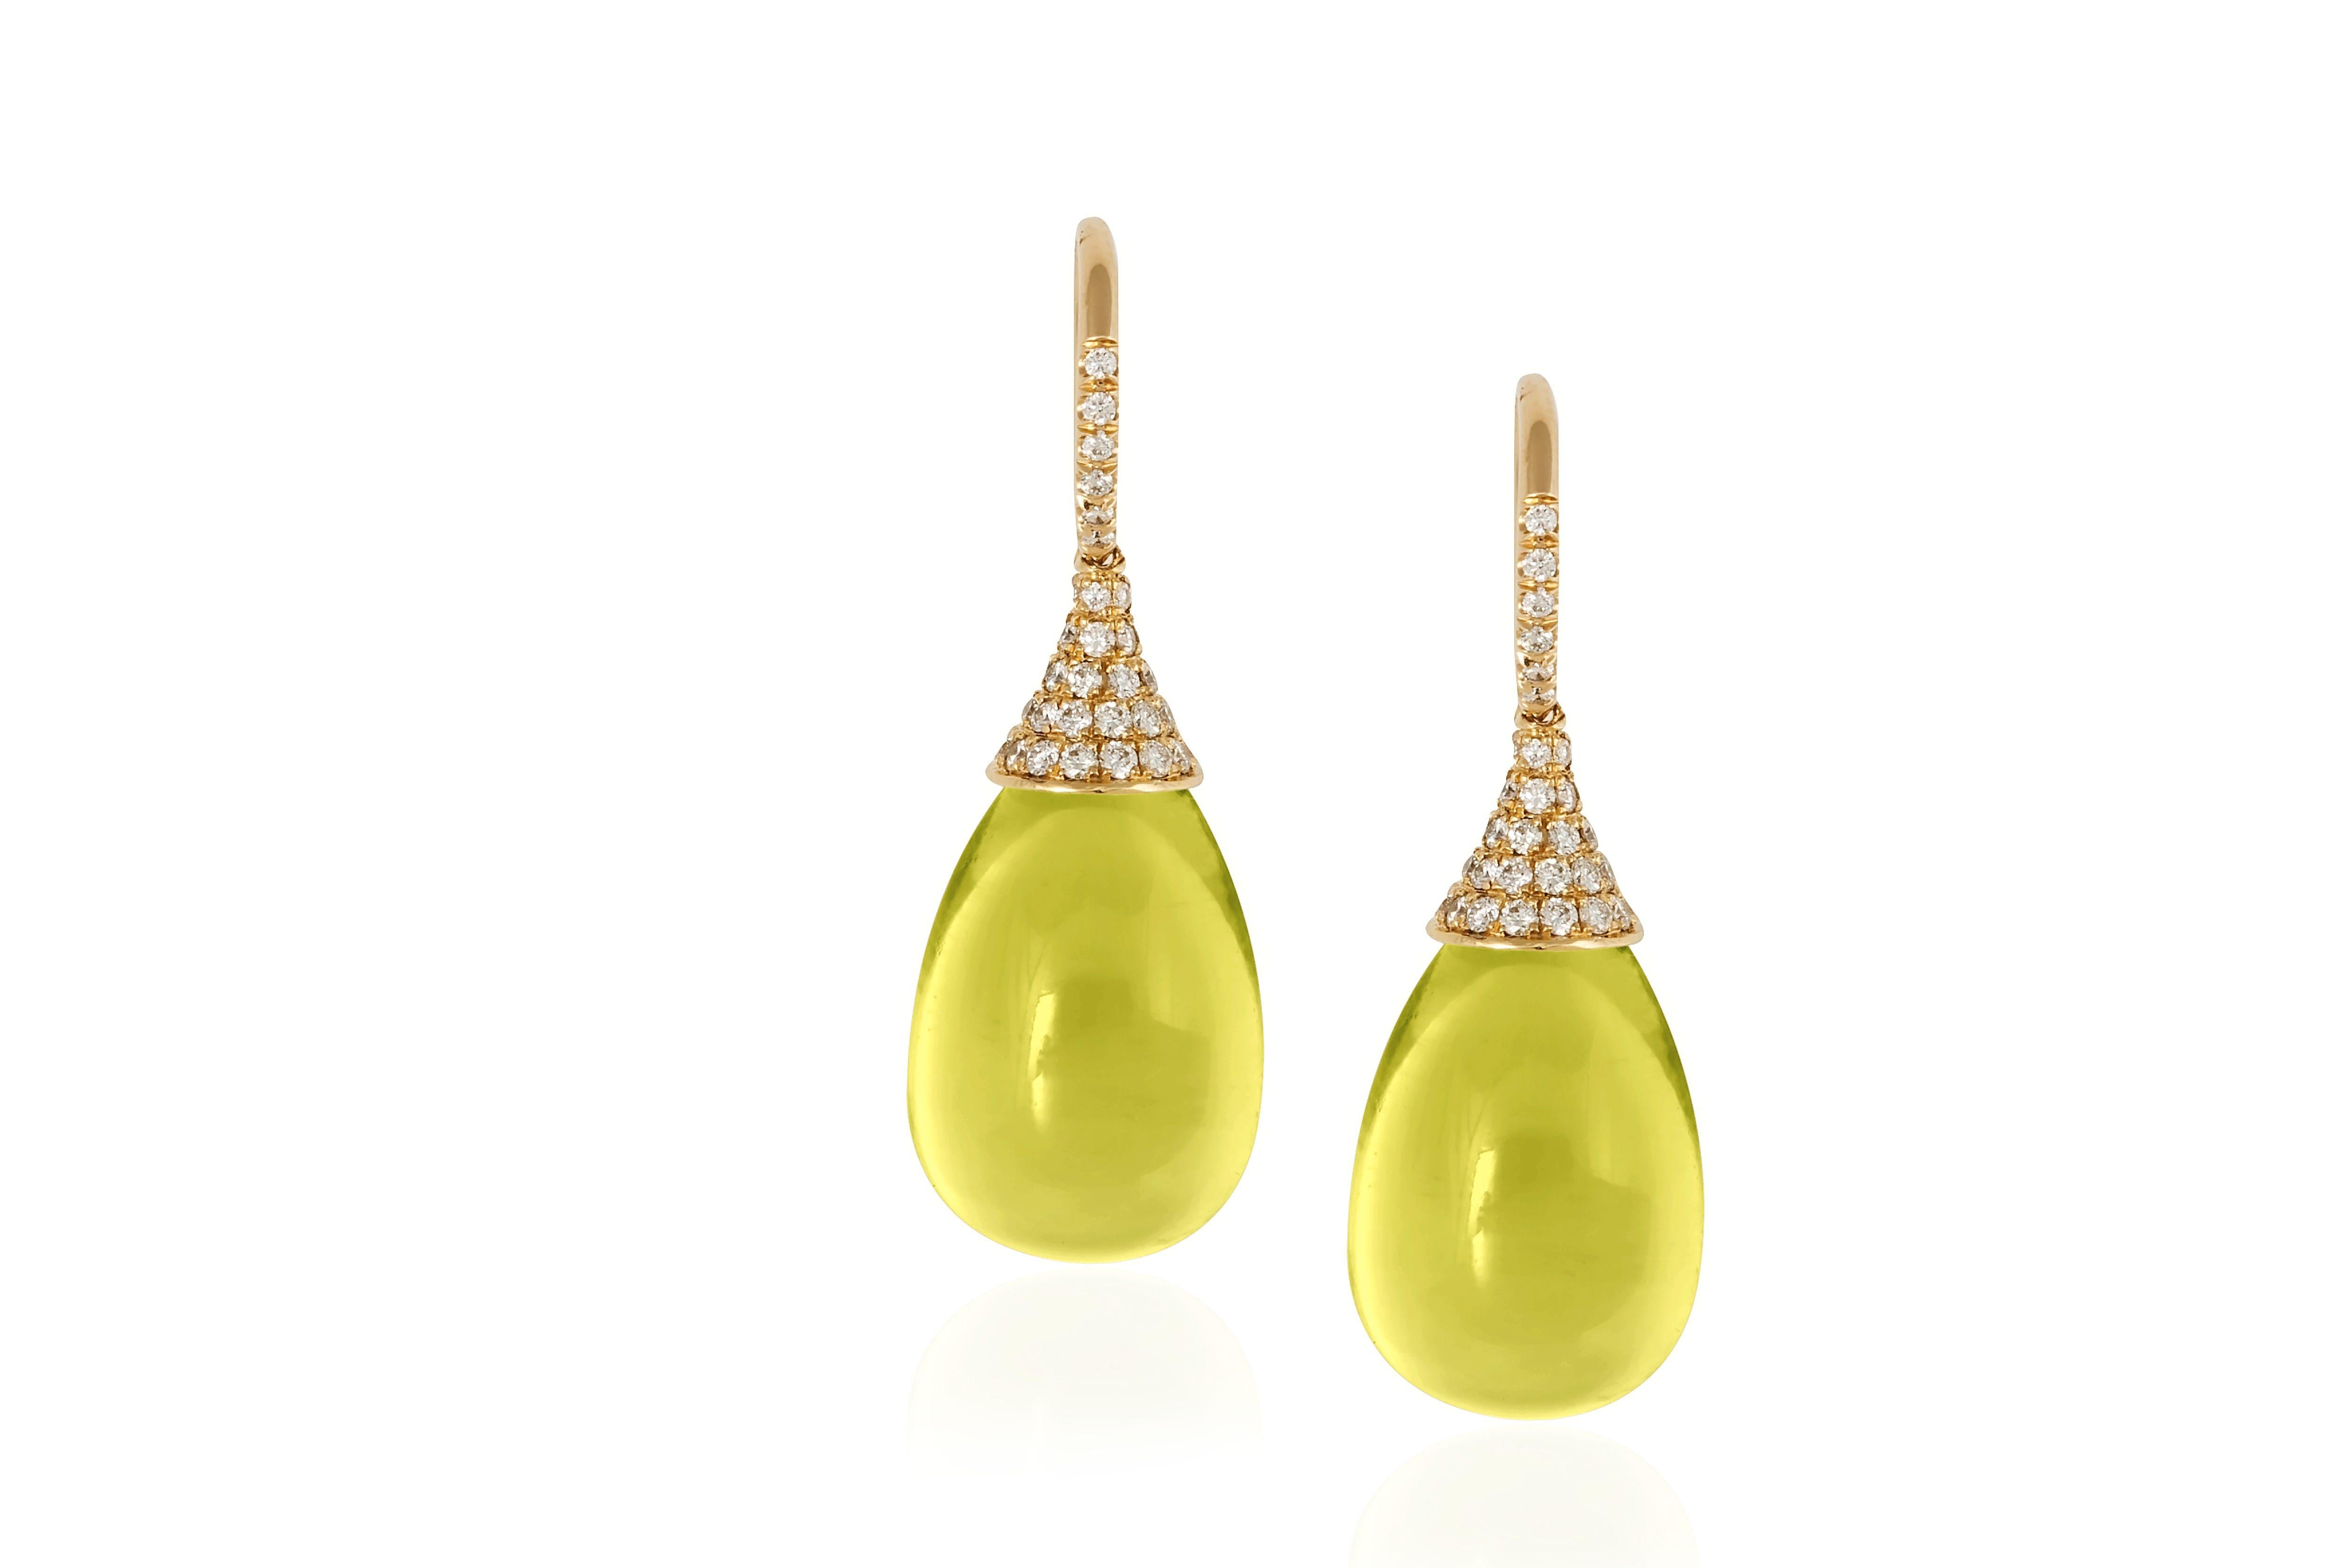 Lemon Quartz Drop Earrings with Diamonds in 18K Yellow Gold from 'Naughty' Collection
 Stone Size: 19 x 12 mm 
 Diamonds: G-H / VS, Approx Wt:0.75 Cts